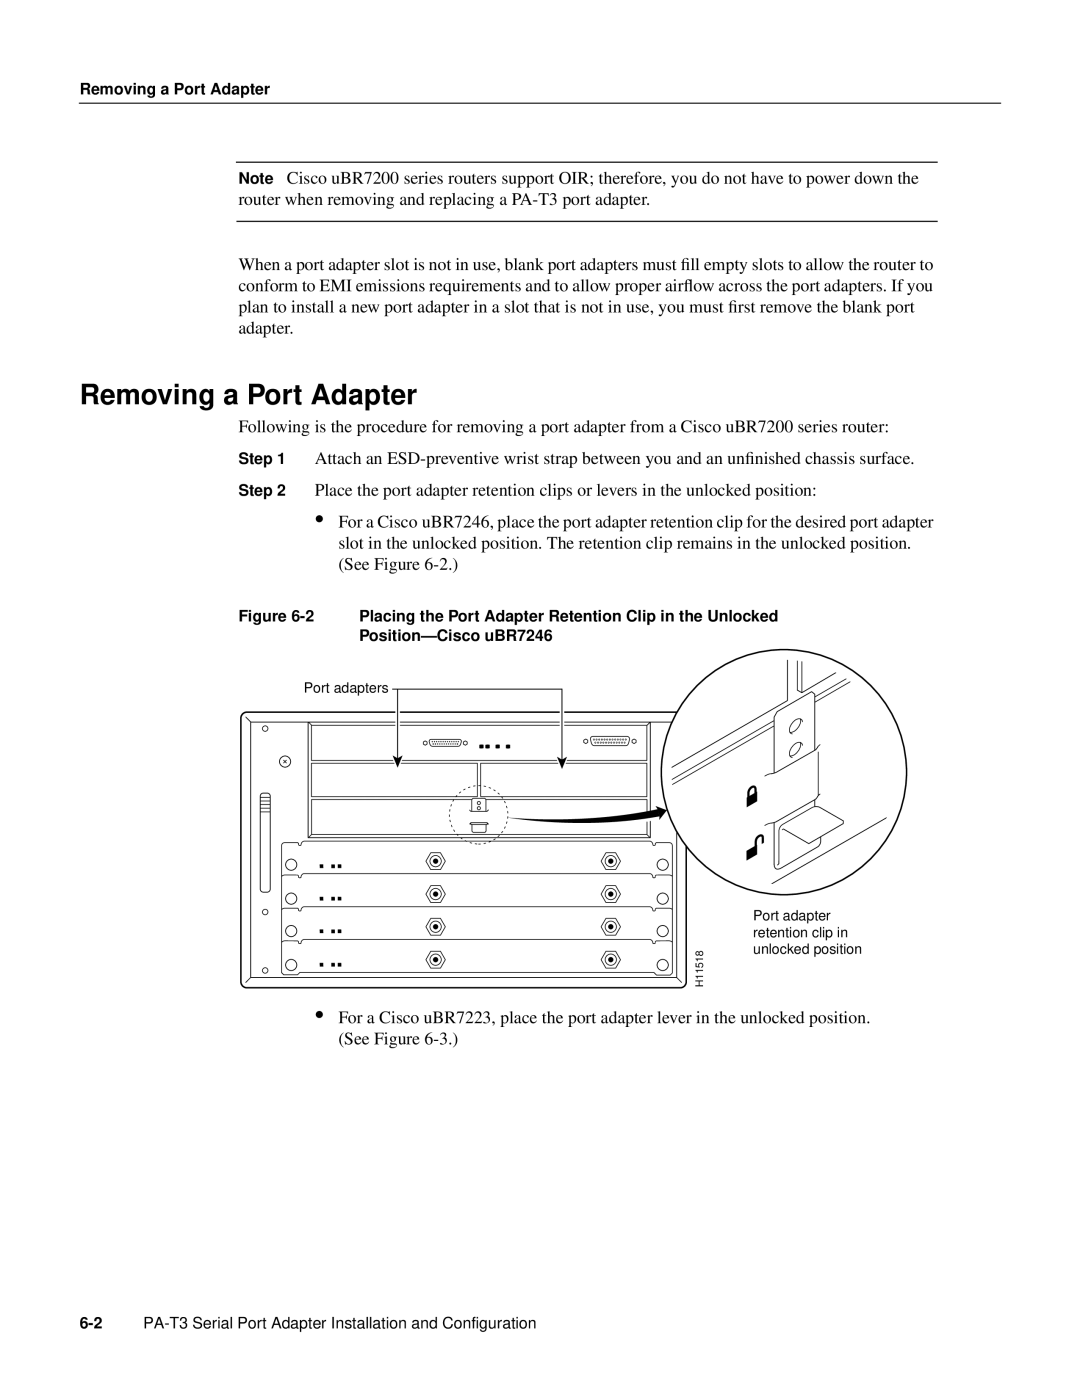 Cisco Systems manual Removing a Port Adapter, PA-T3 Serial Port Adapter Installation and Configuration, Port adapters 